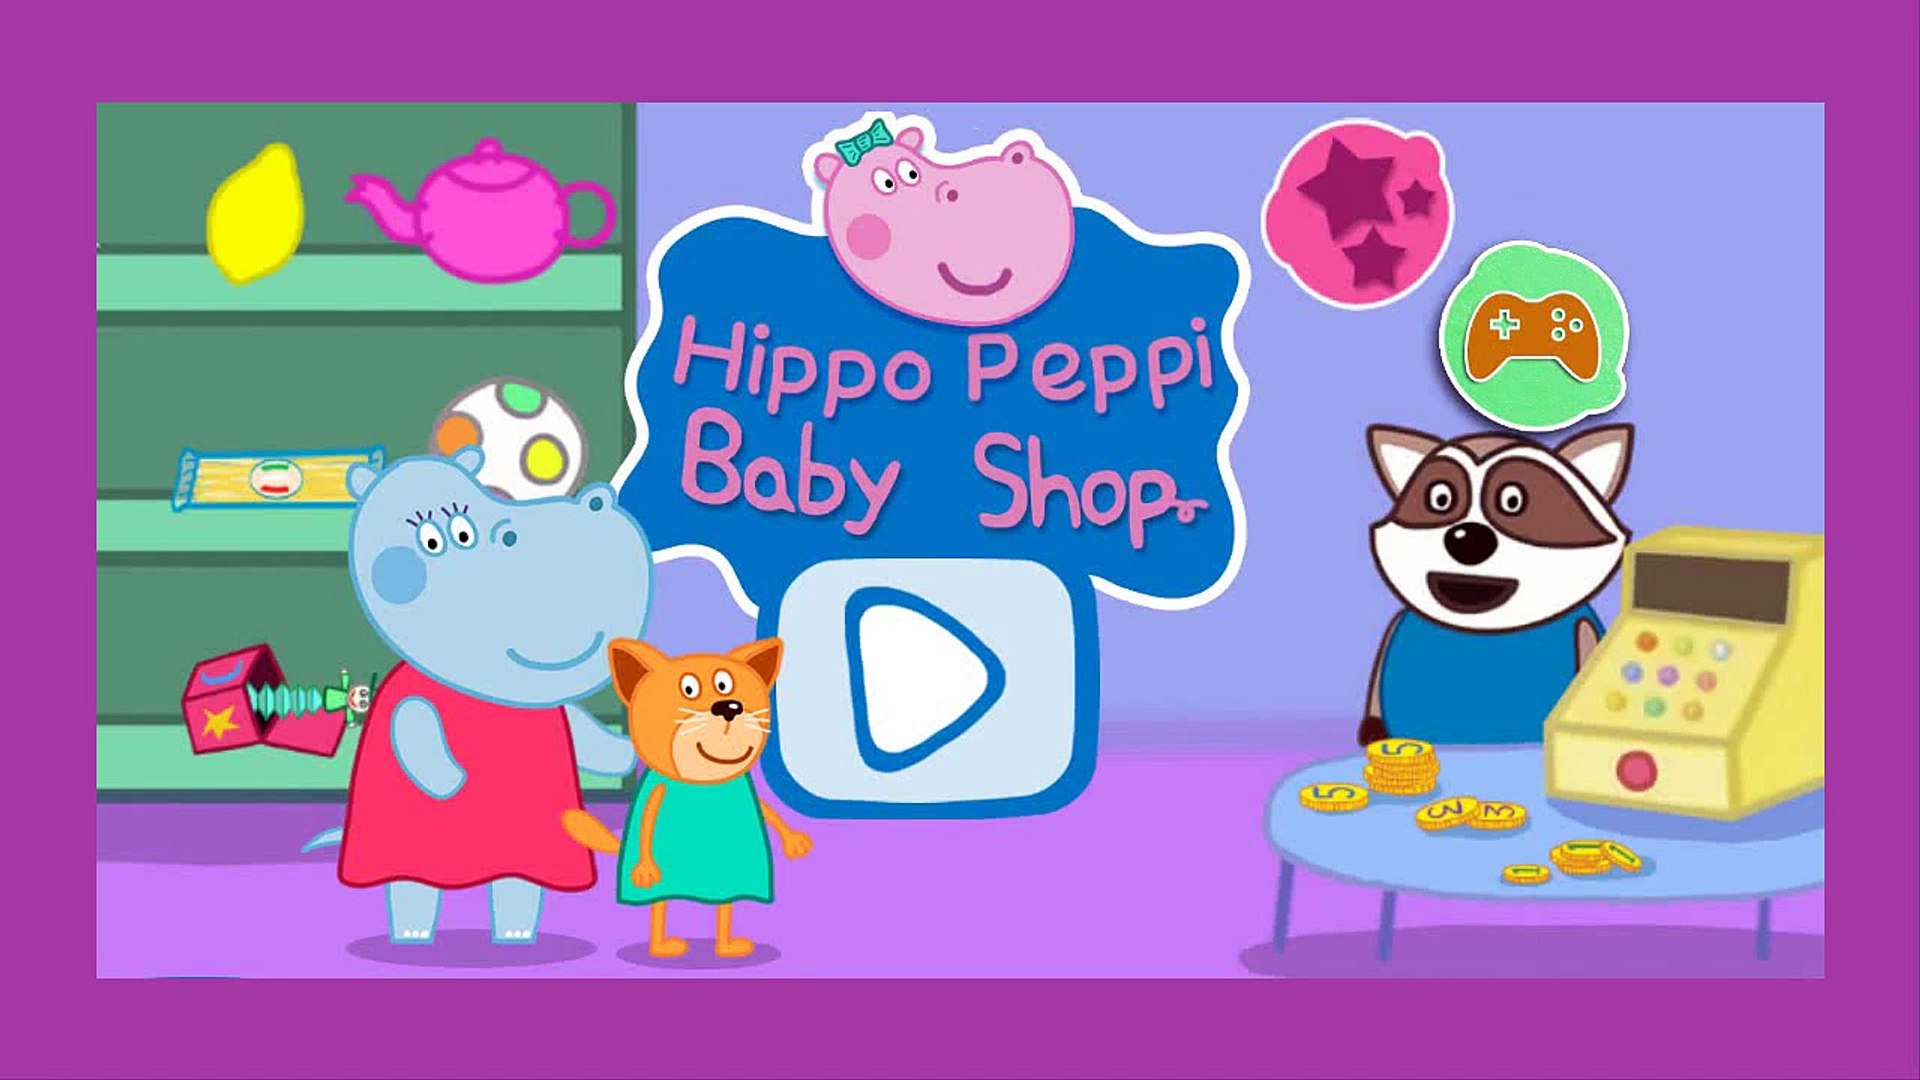 Hippo Peppi Baby Shop, Kids learn Pay in the Shop, Education App Gameplay for Kids